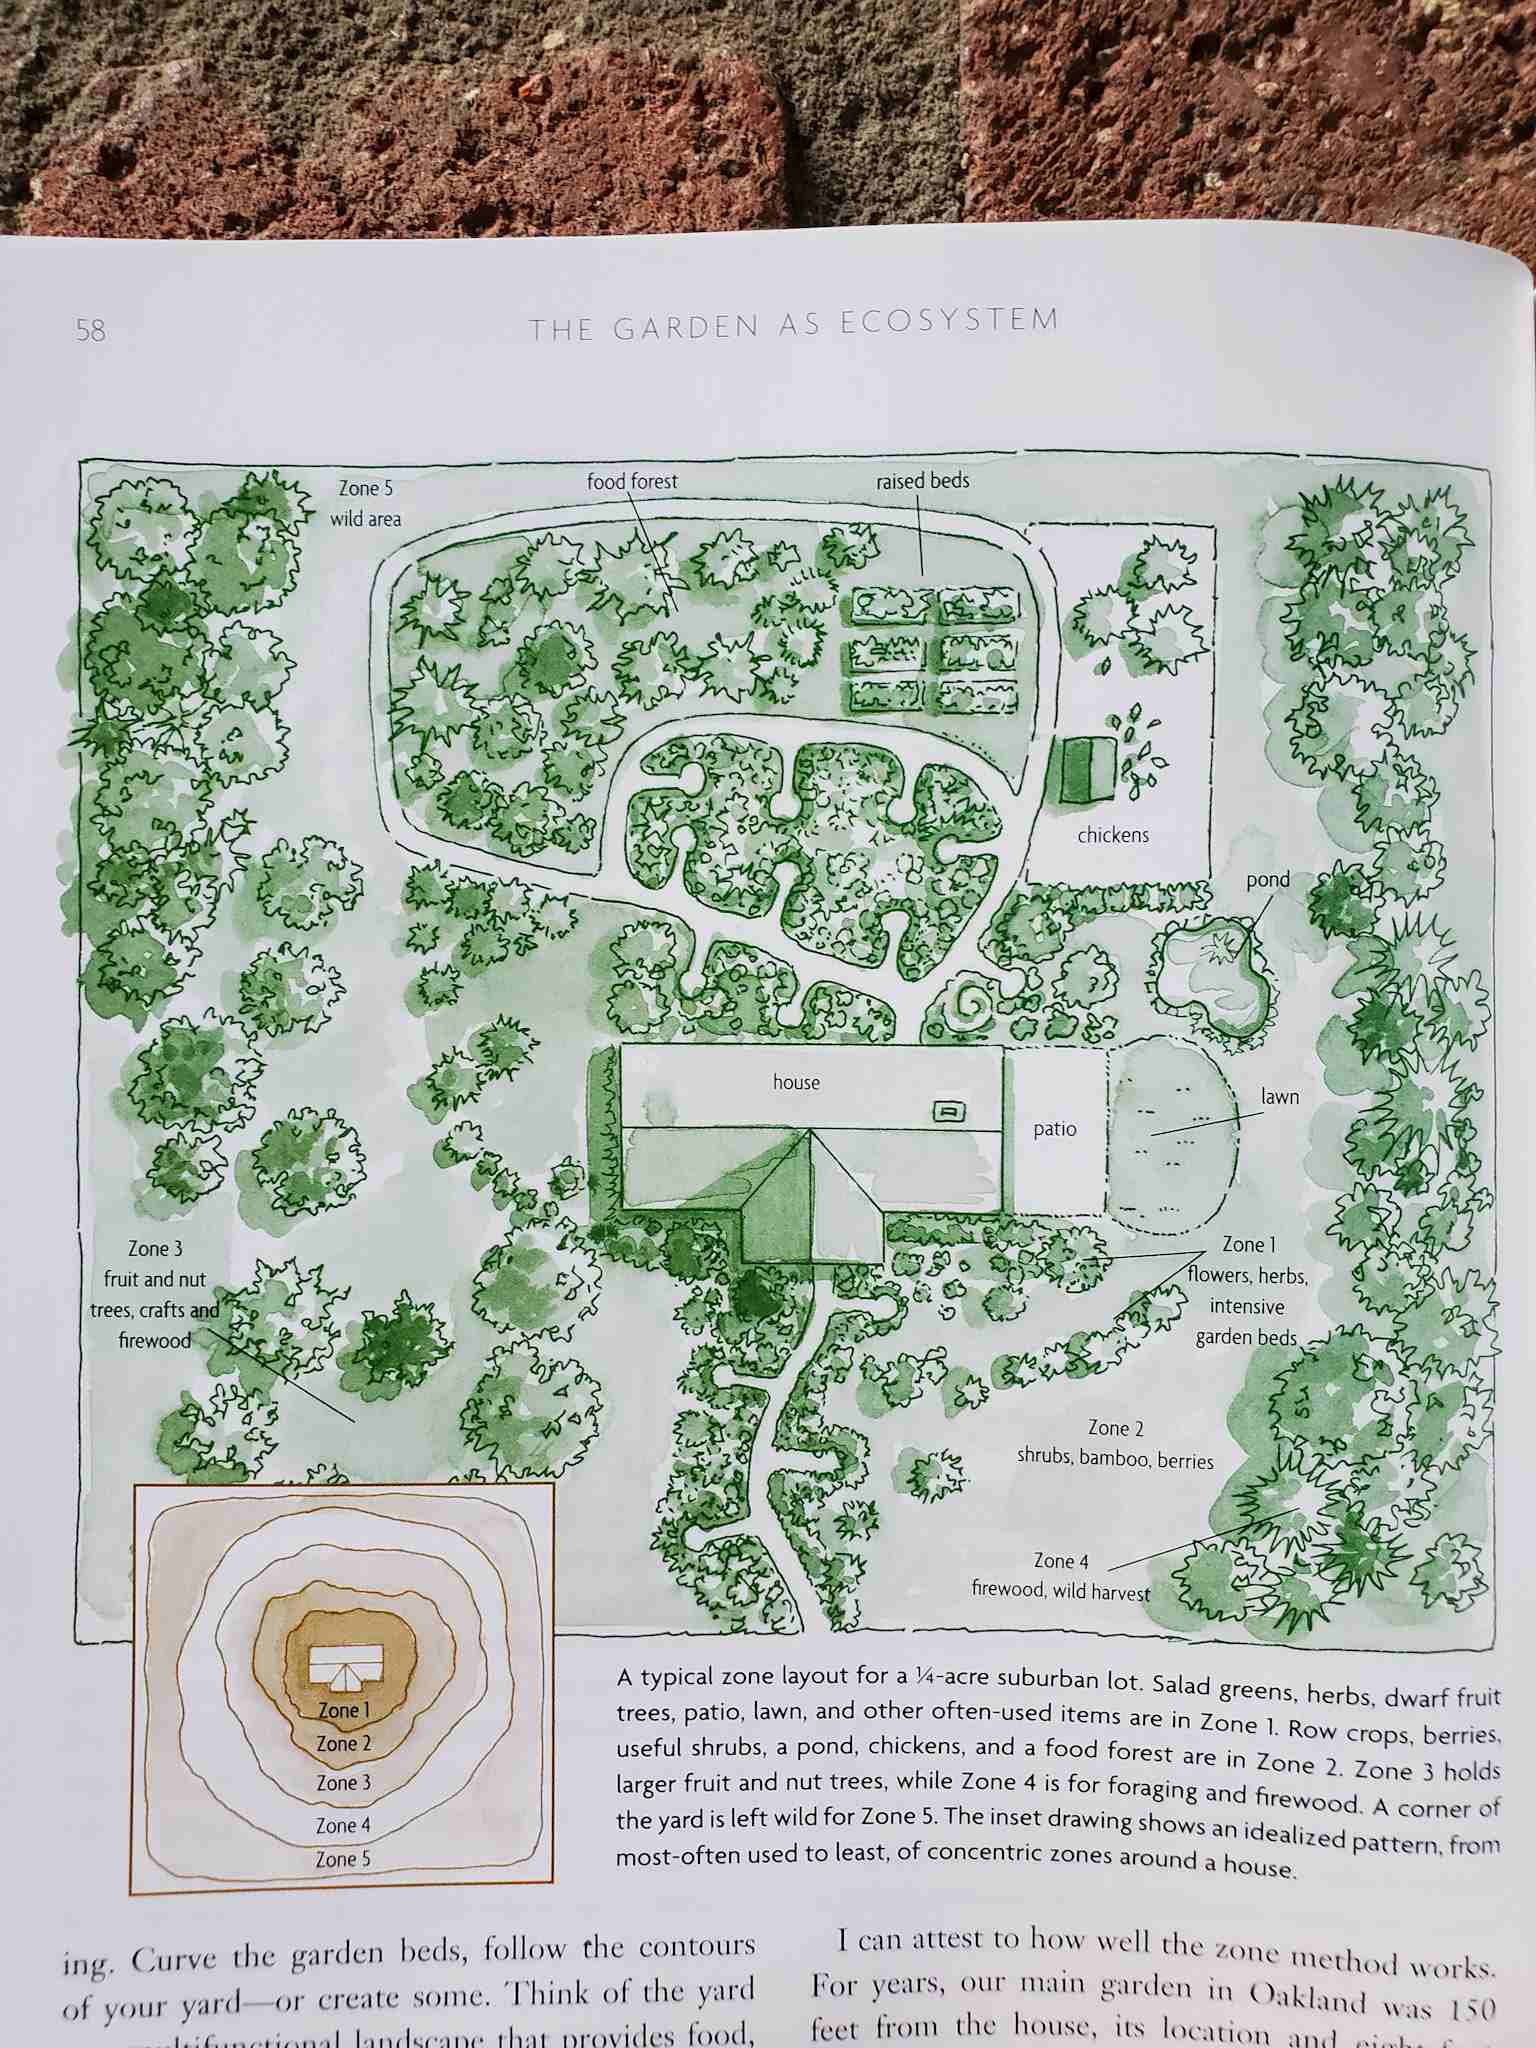 A great gardening book about permaculture is open to a page showing a drawing, illustrating the garden as an ecosystem set up around a house. There are flowers, herbs and intensive garden beds close to the house. Shrubs and berries a little further away, followed by firewood and wild harvest even further. There are also fruit and nut trees, raised beds, a pond, chickens, and a food forest set up around the household. 